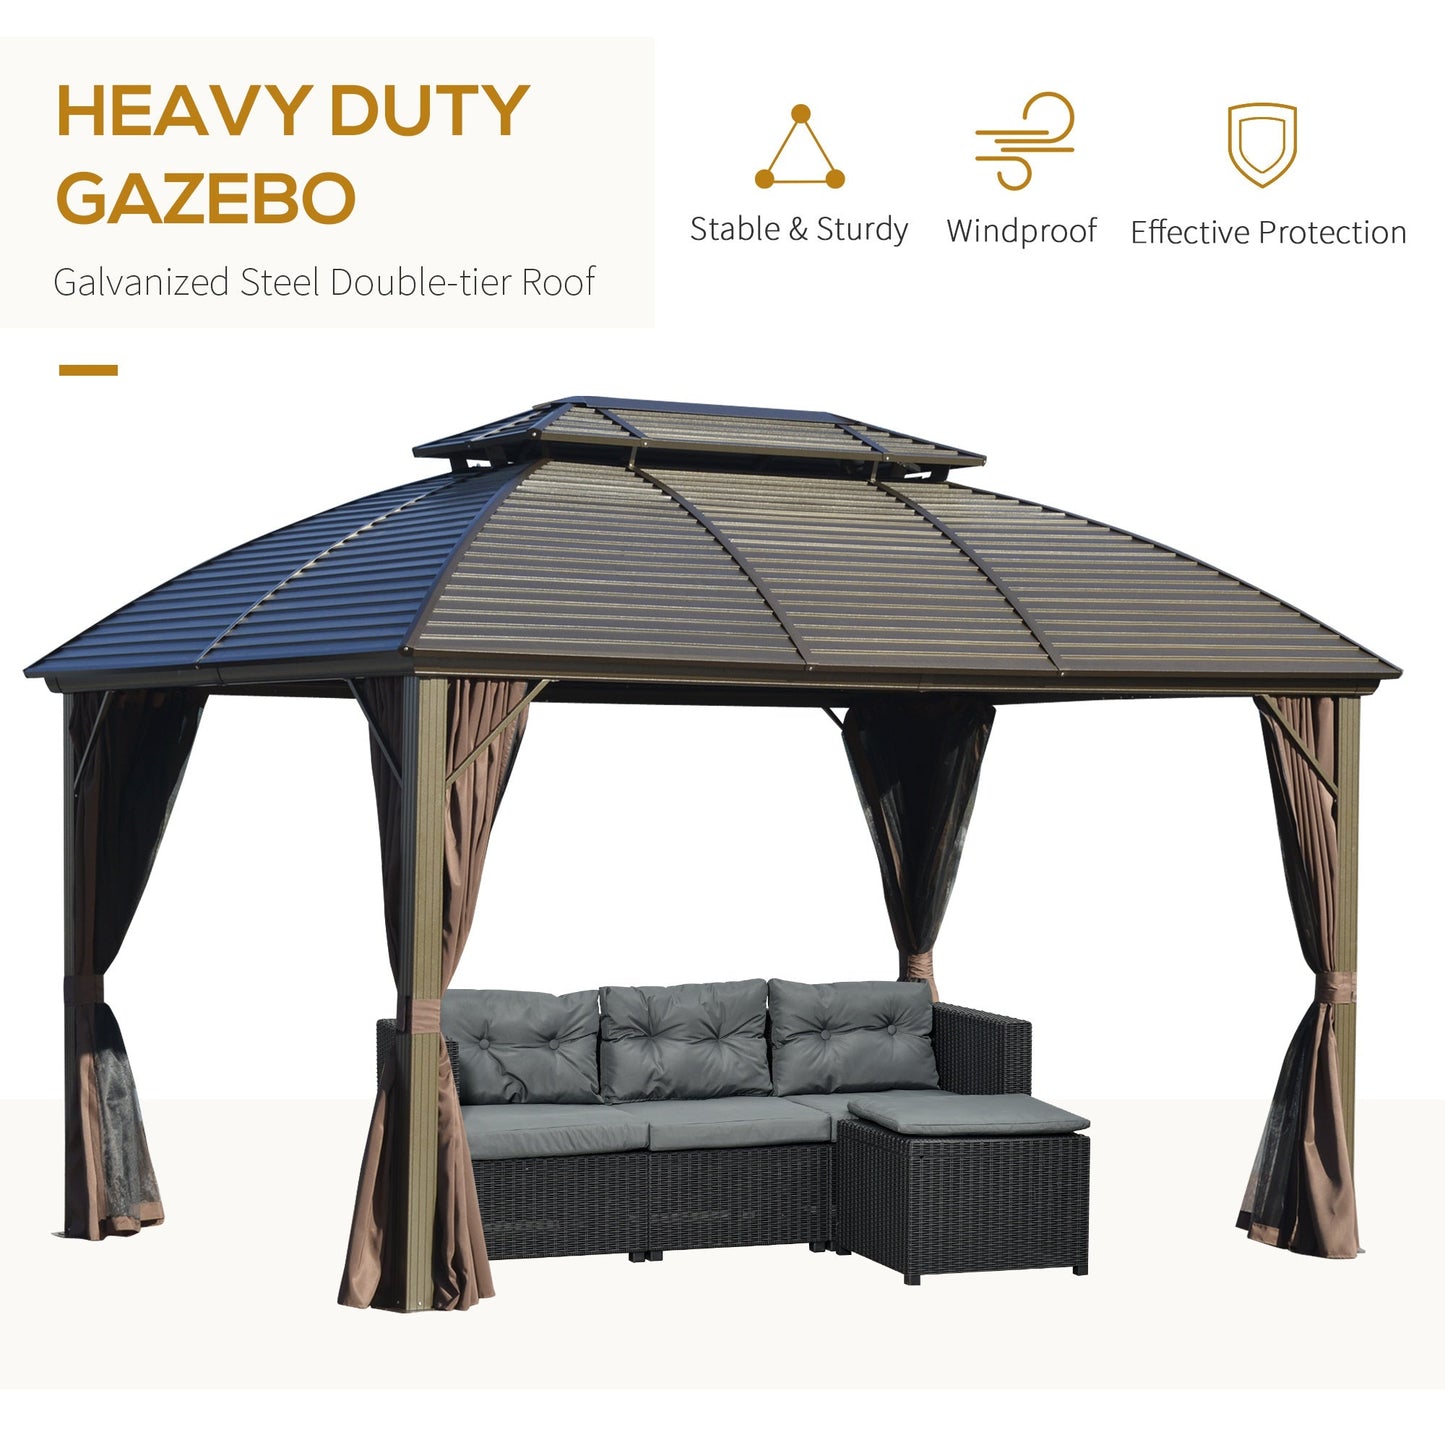 Outdoor and Garden-10x12 Hardtop Gazebo with Aluminum Frame, Permanent Metal Roof Gazebo Canopy with Curtains and Netting for Garden, Patio, Backyard, Brown - Outdoor Style Company